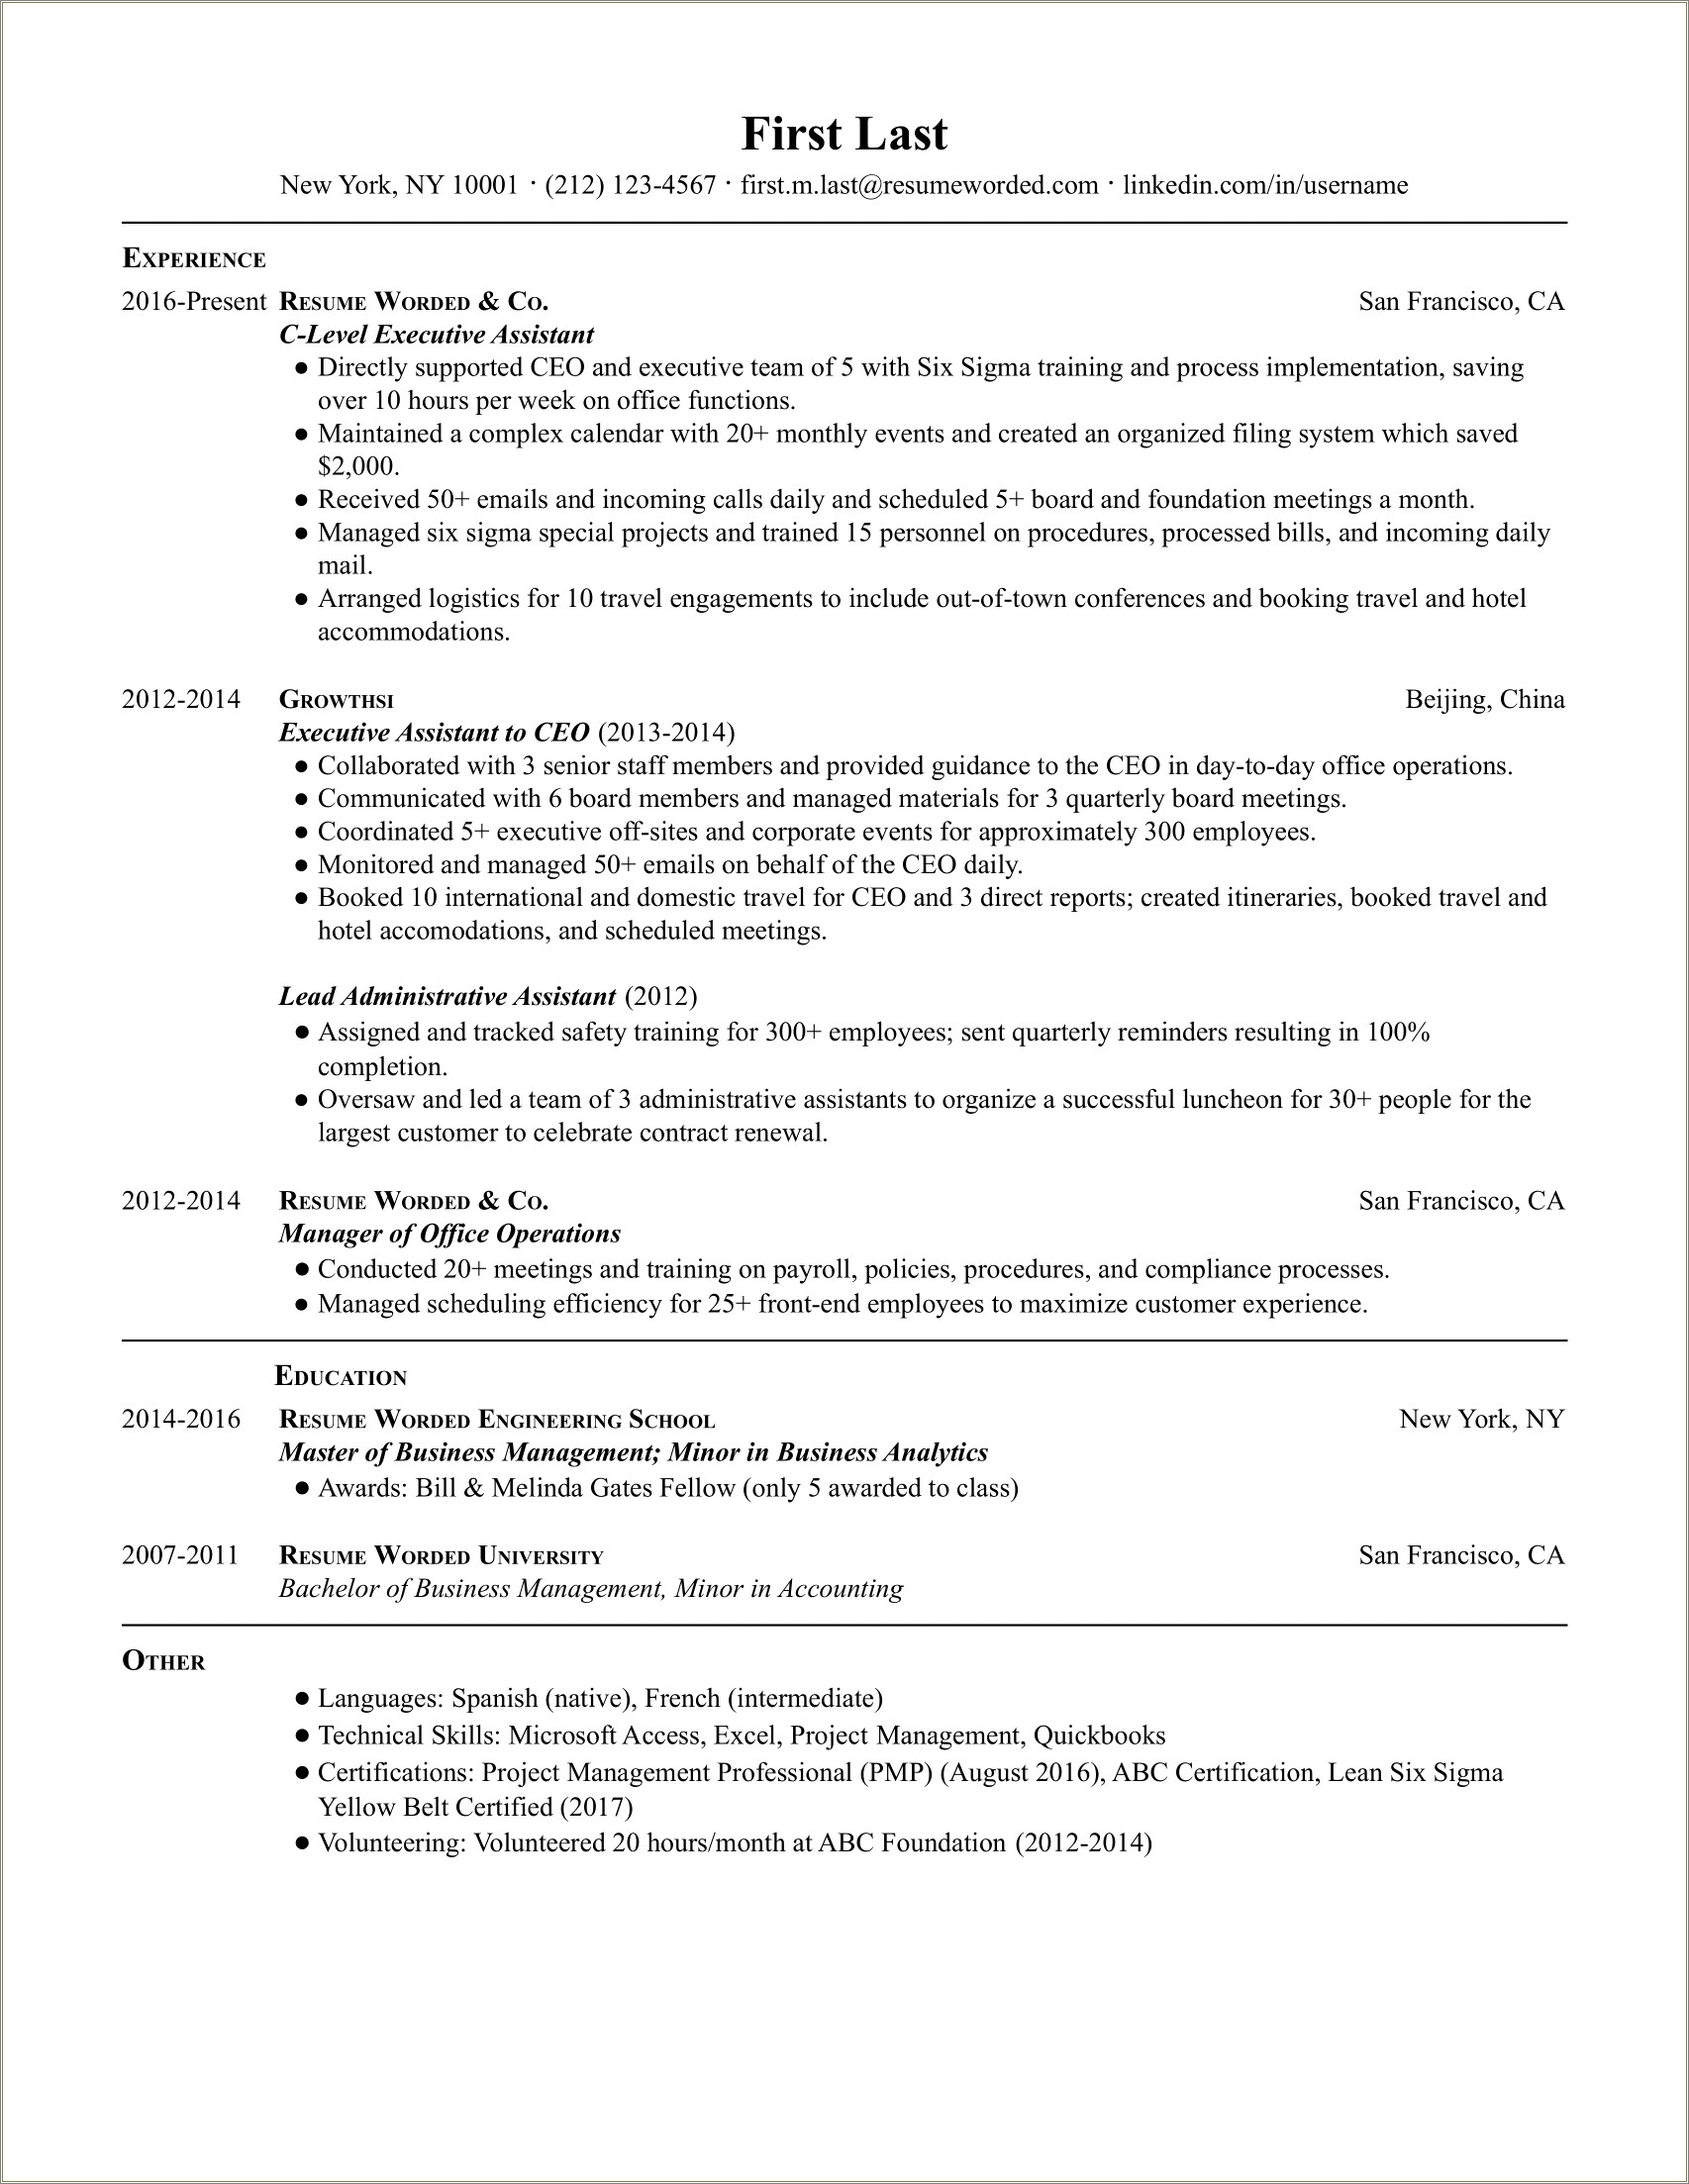 Resume Objective Statement Examples Executive Assistants